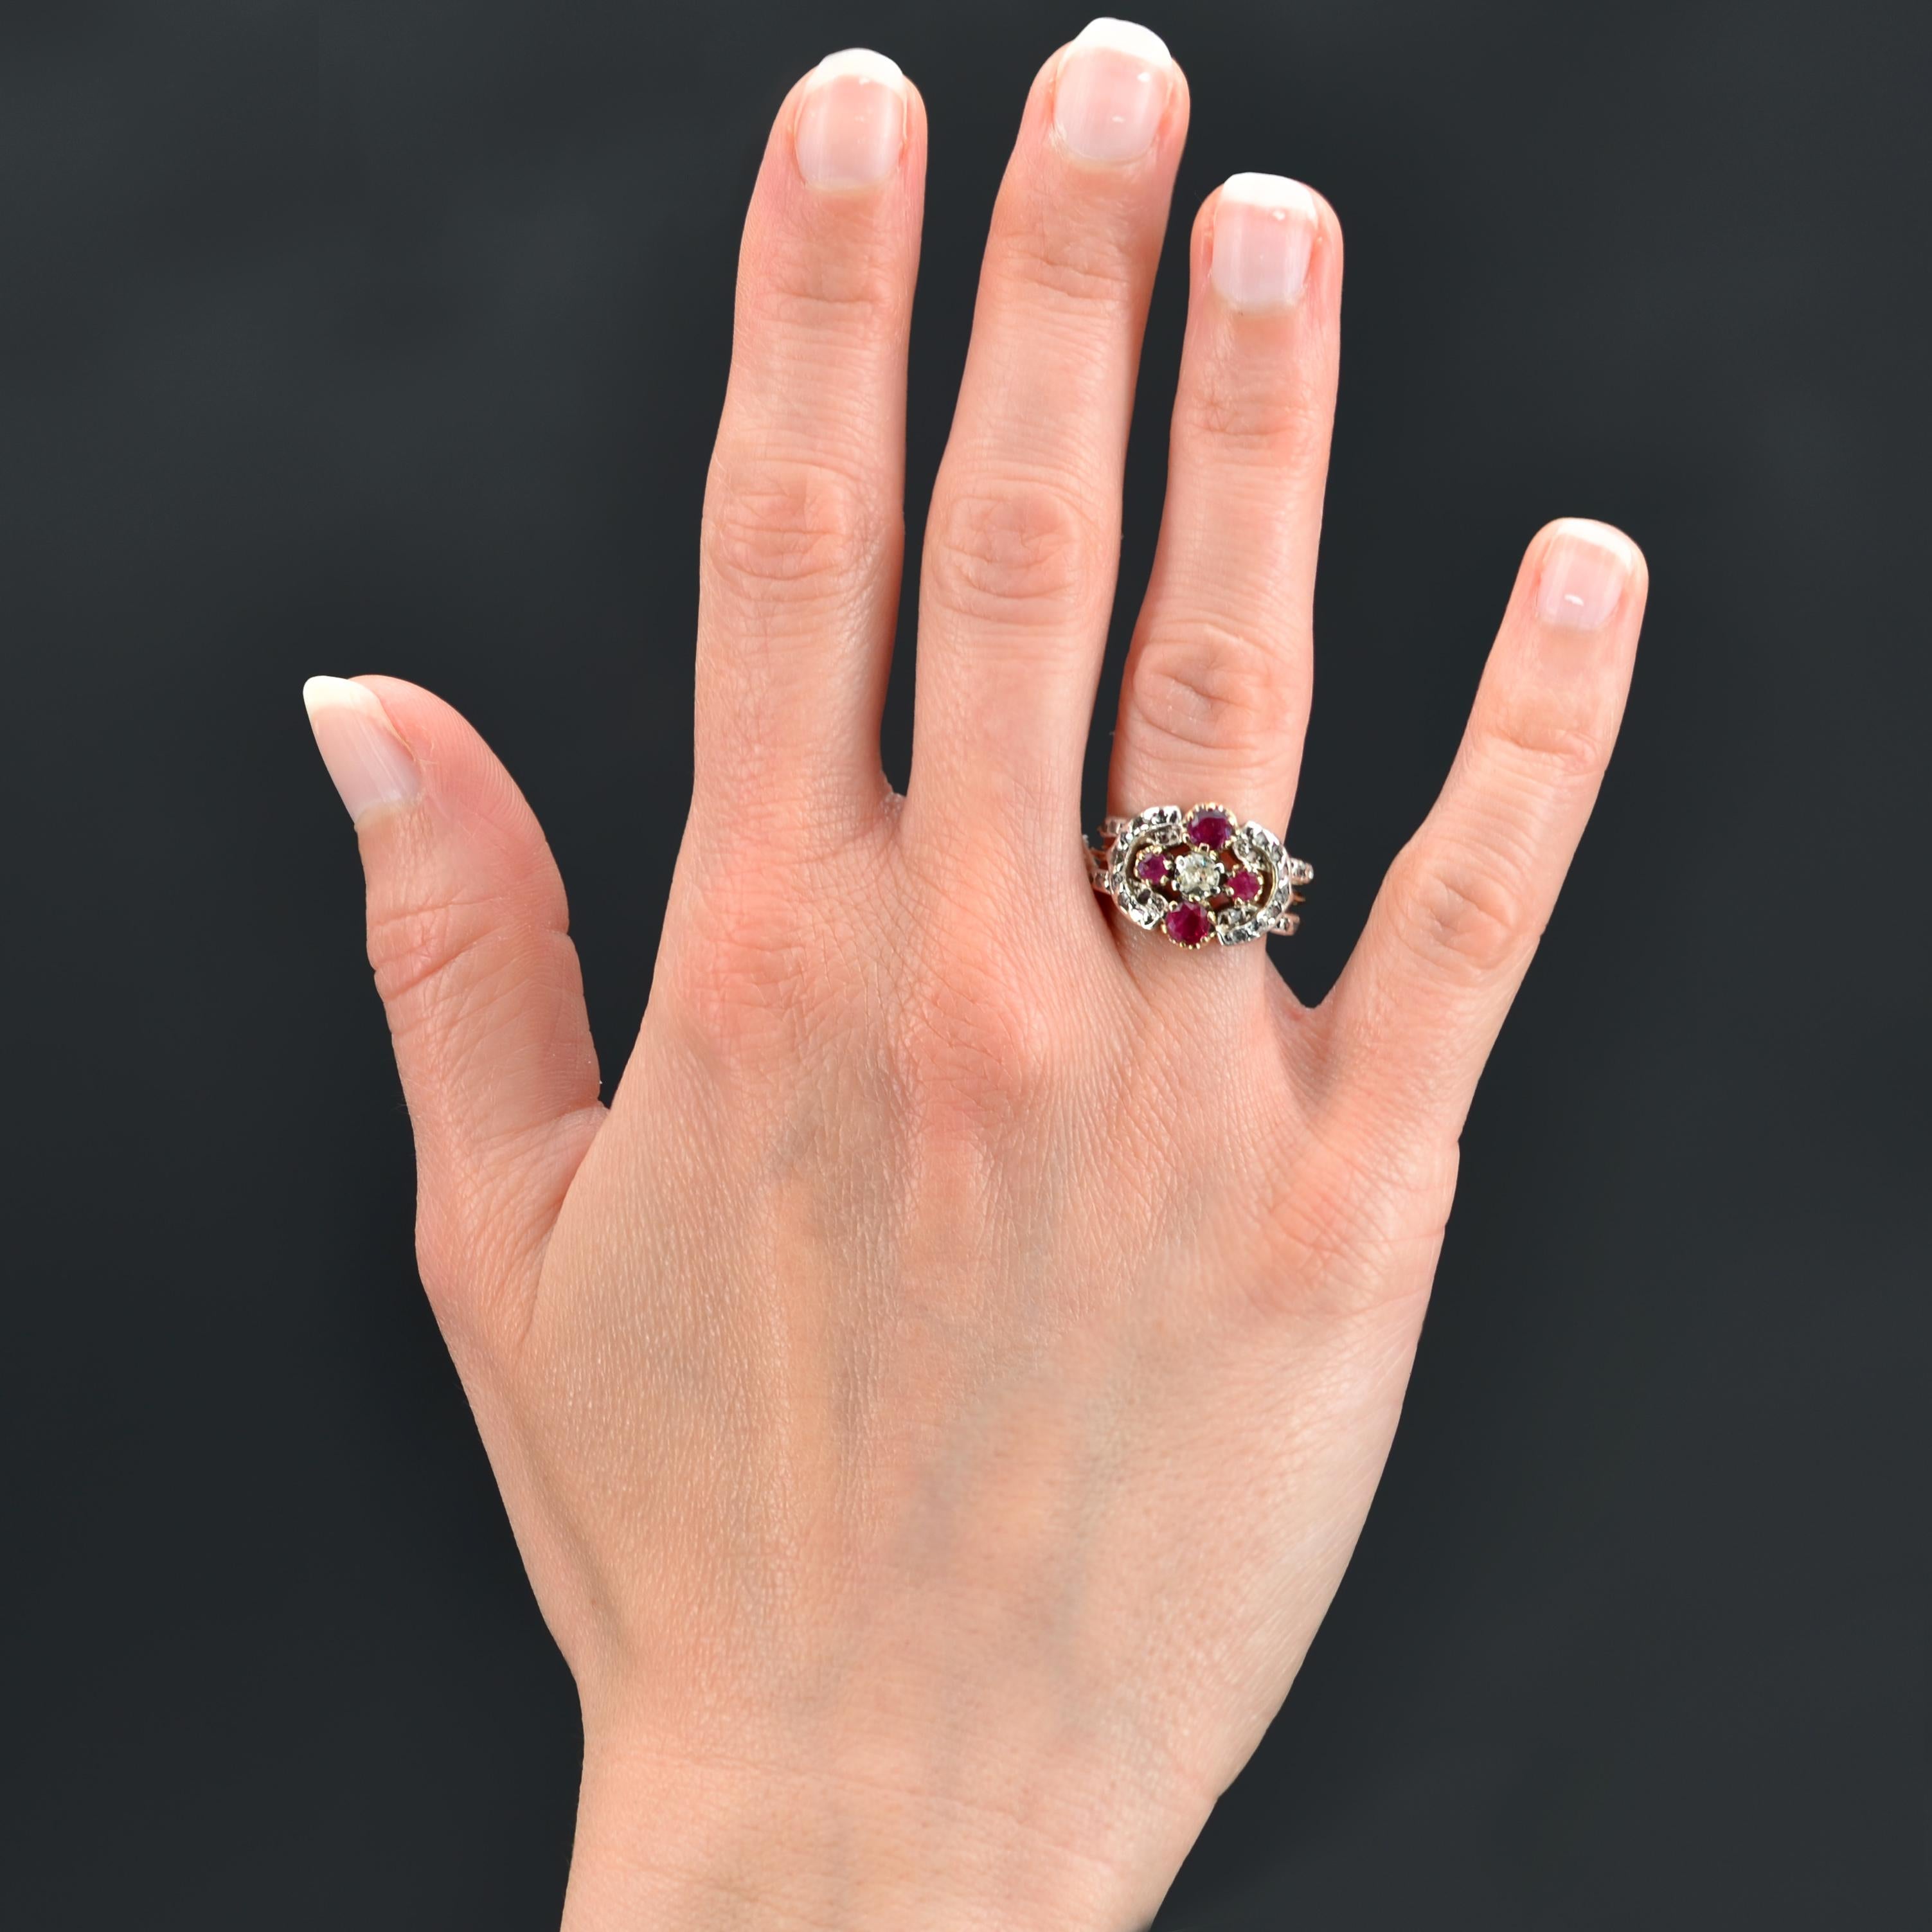 Ring in 18 karat yellow gold, and silver.
Antique ring of charm, it is decorated on its top of a brilliant- cut diamond and 4 round rubies, the whole forming a cross. An openwork silver decoration set with rose-cut diamonds frames this design. Three